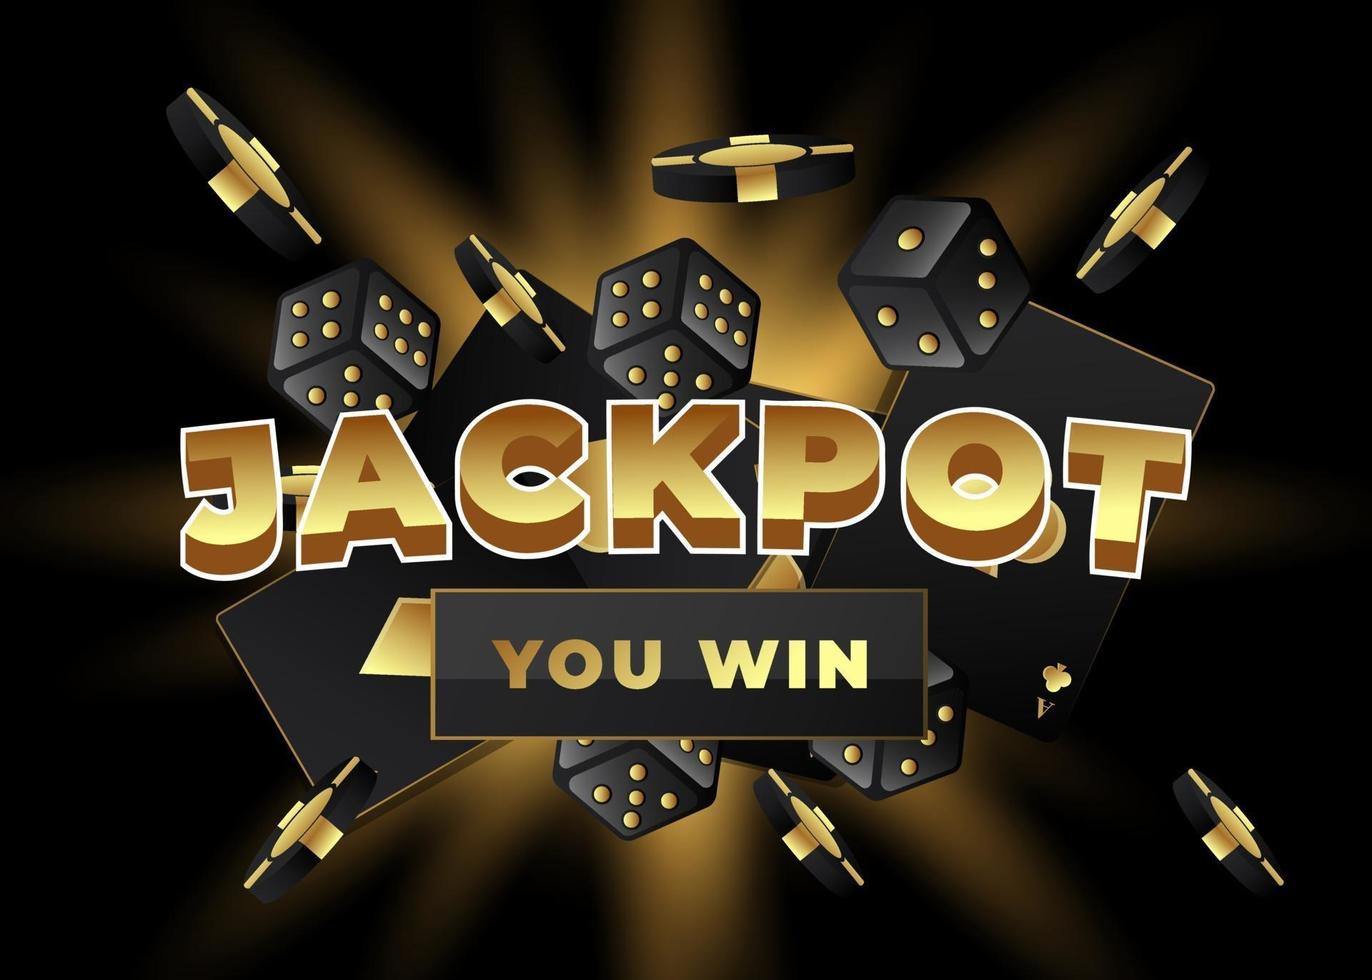 jackpot background with playing cards, dice and coin vector